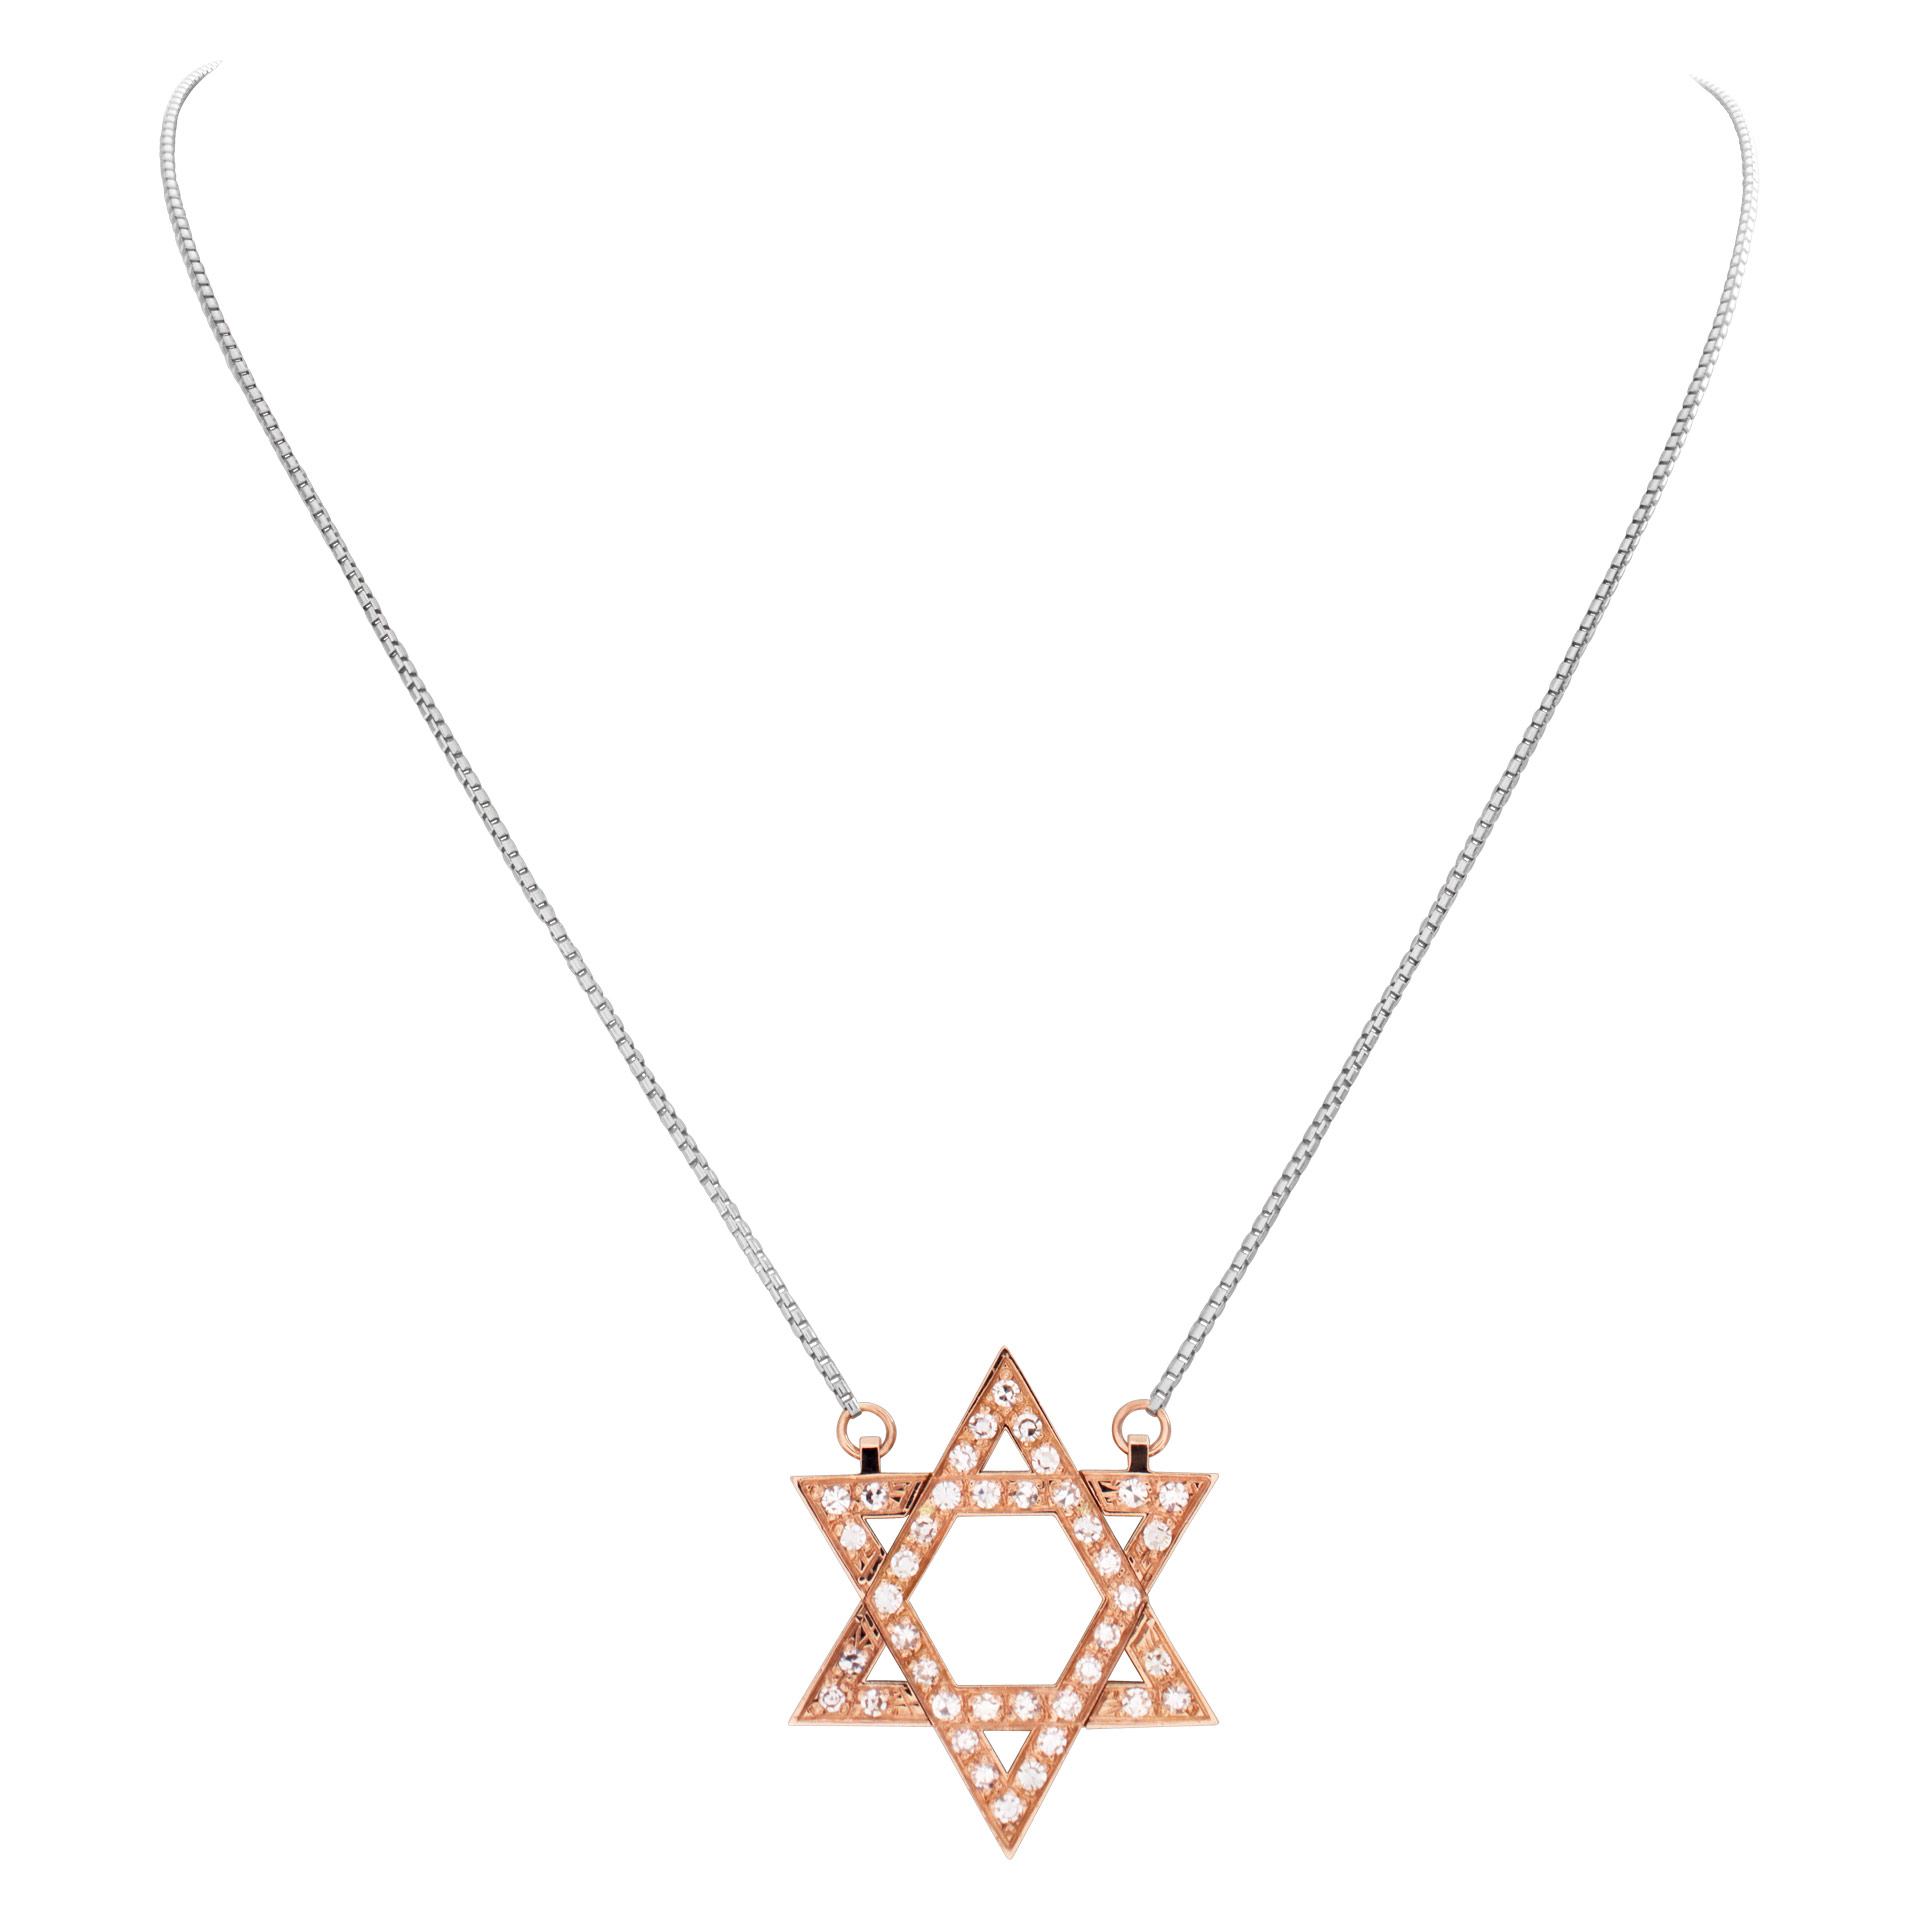 "Star of David" pendant with approximately 0.75 carat pave diamonds set in 18k rose gold with an 18k white gold chain (Stones) image 1